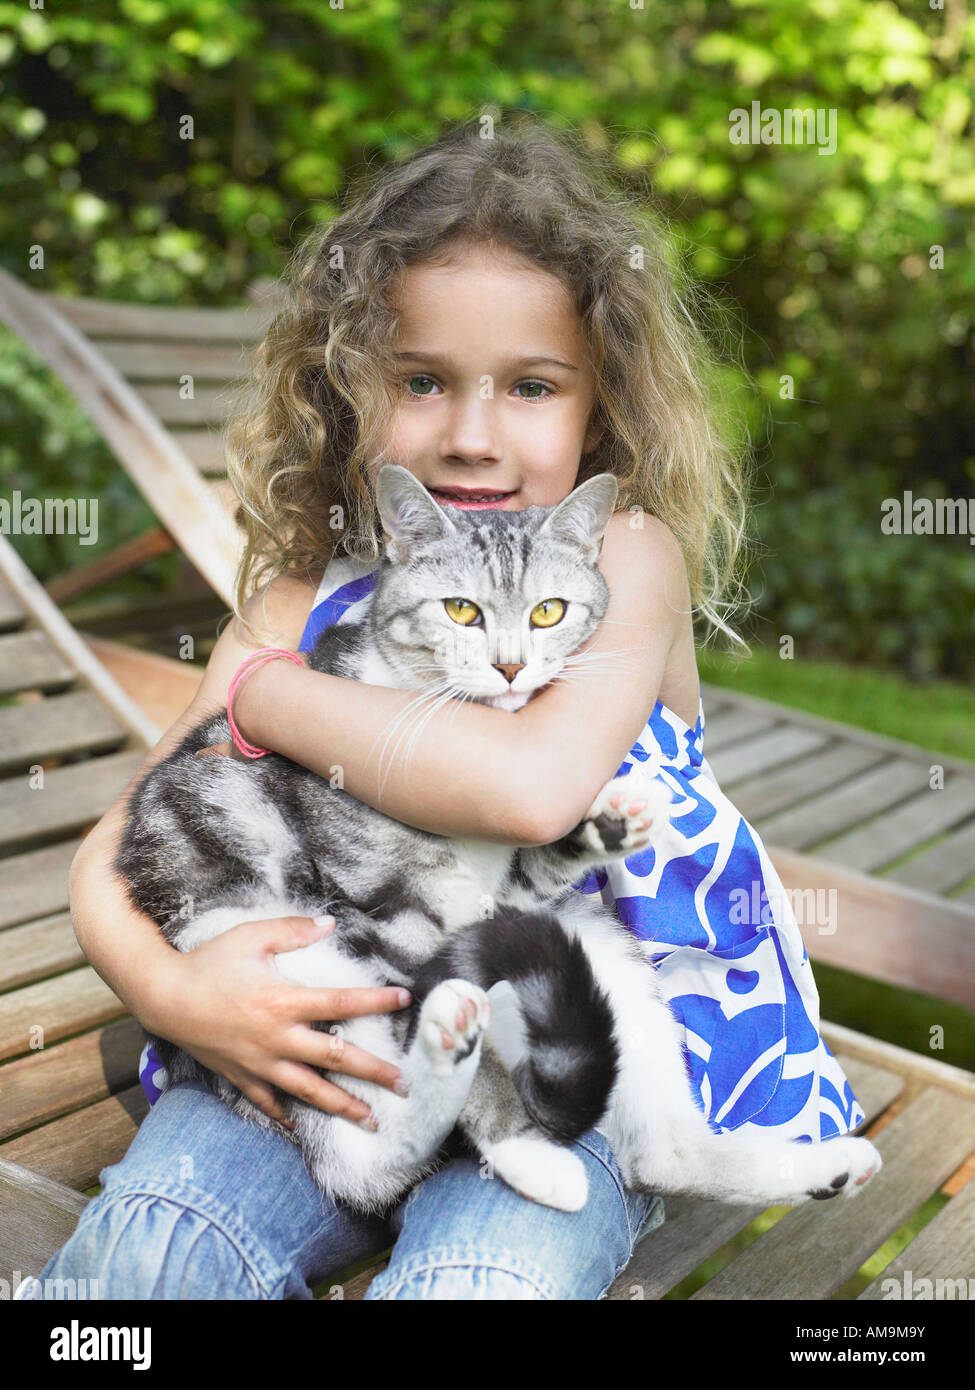 Young girl outdoors smiling with a cat on her lap. Stock Photo